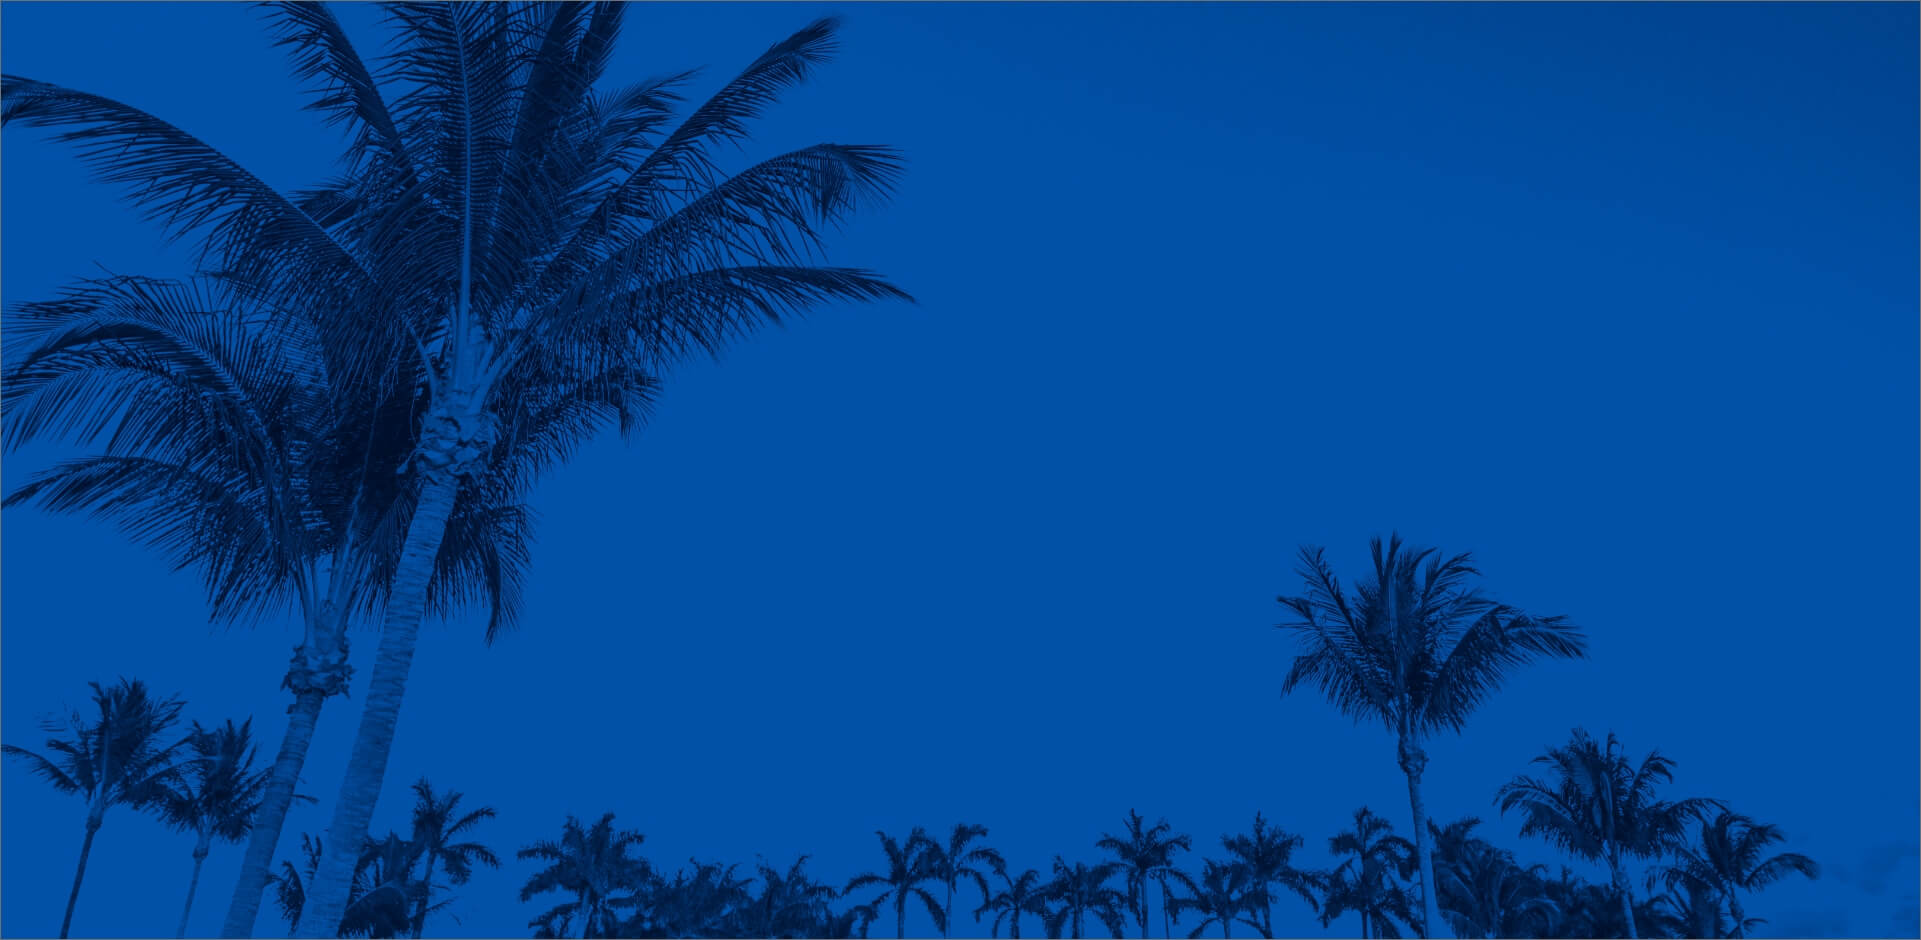 Palm trees under the sky with a blue tint overlay